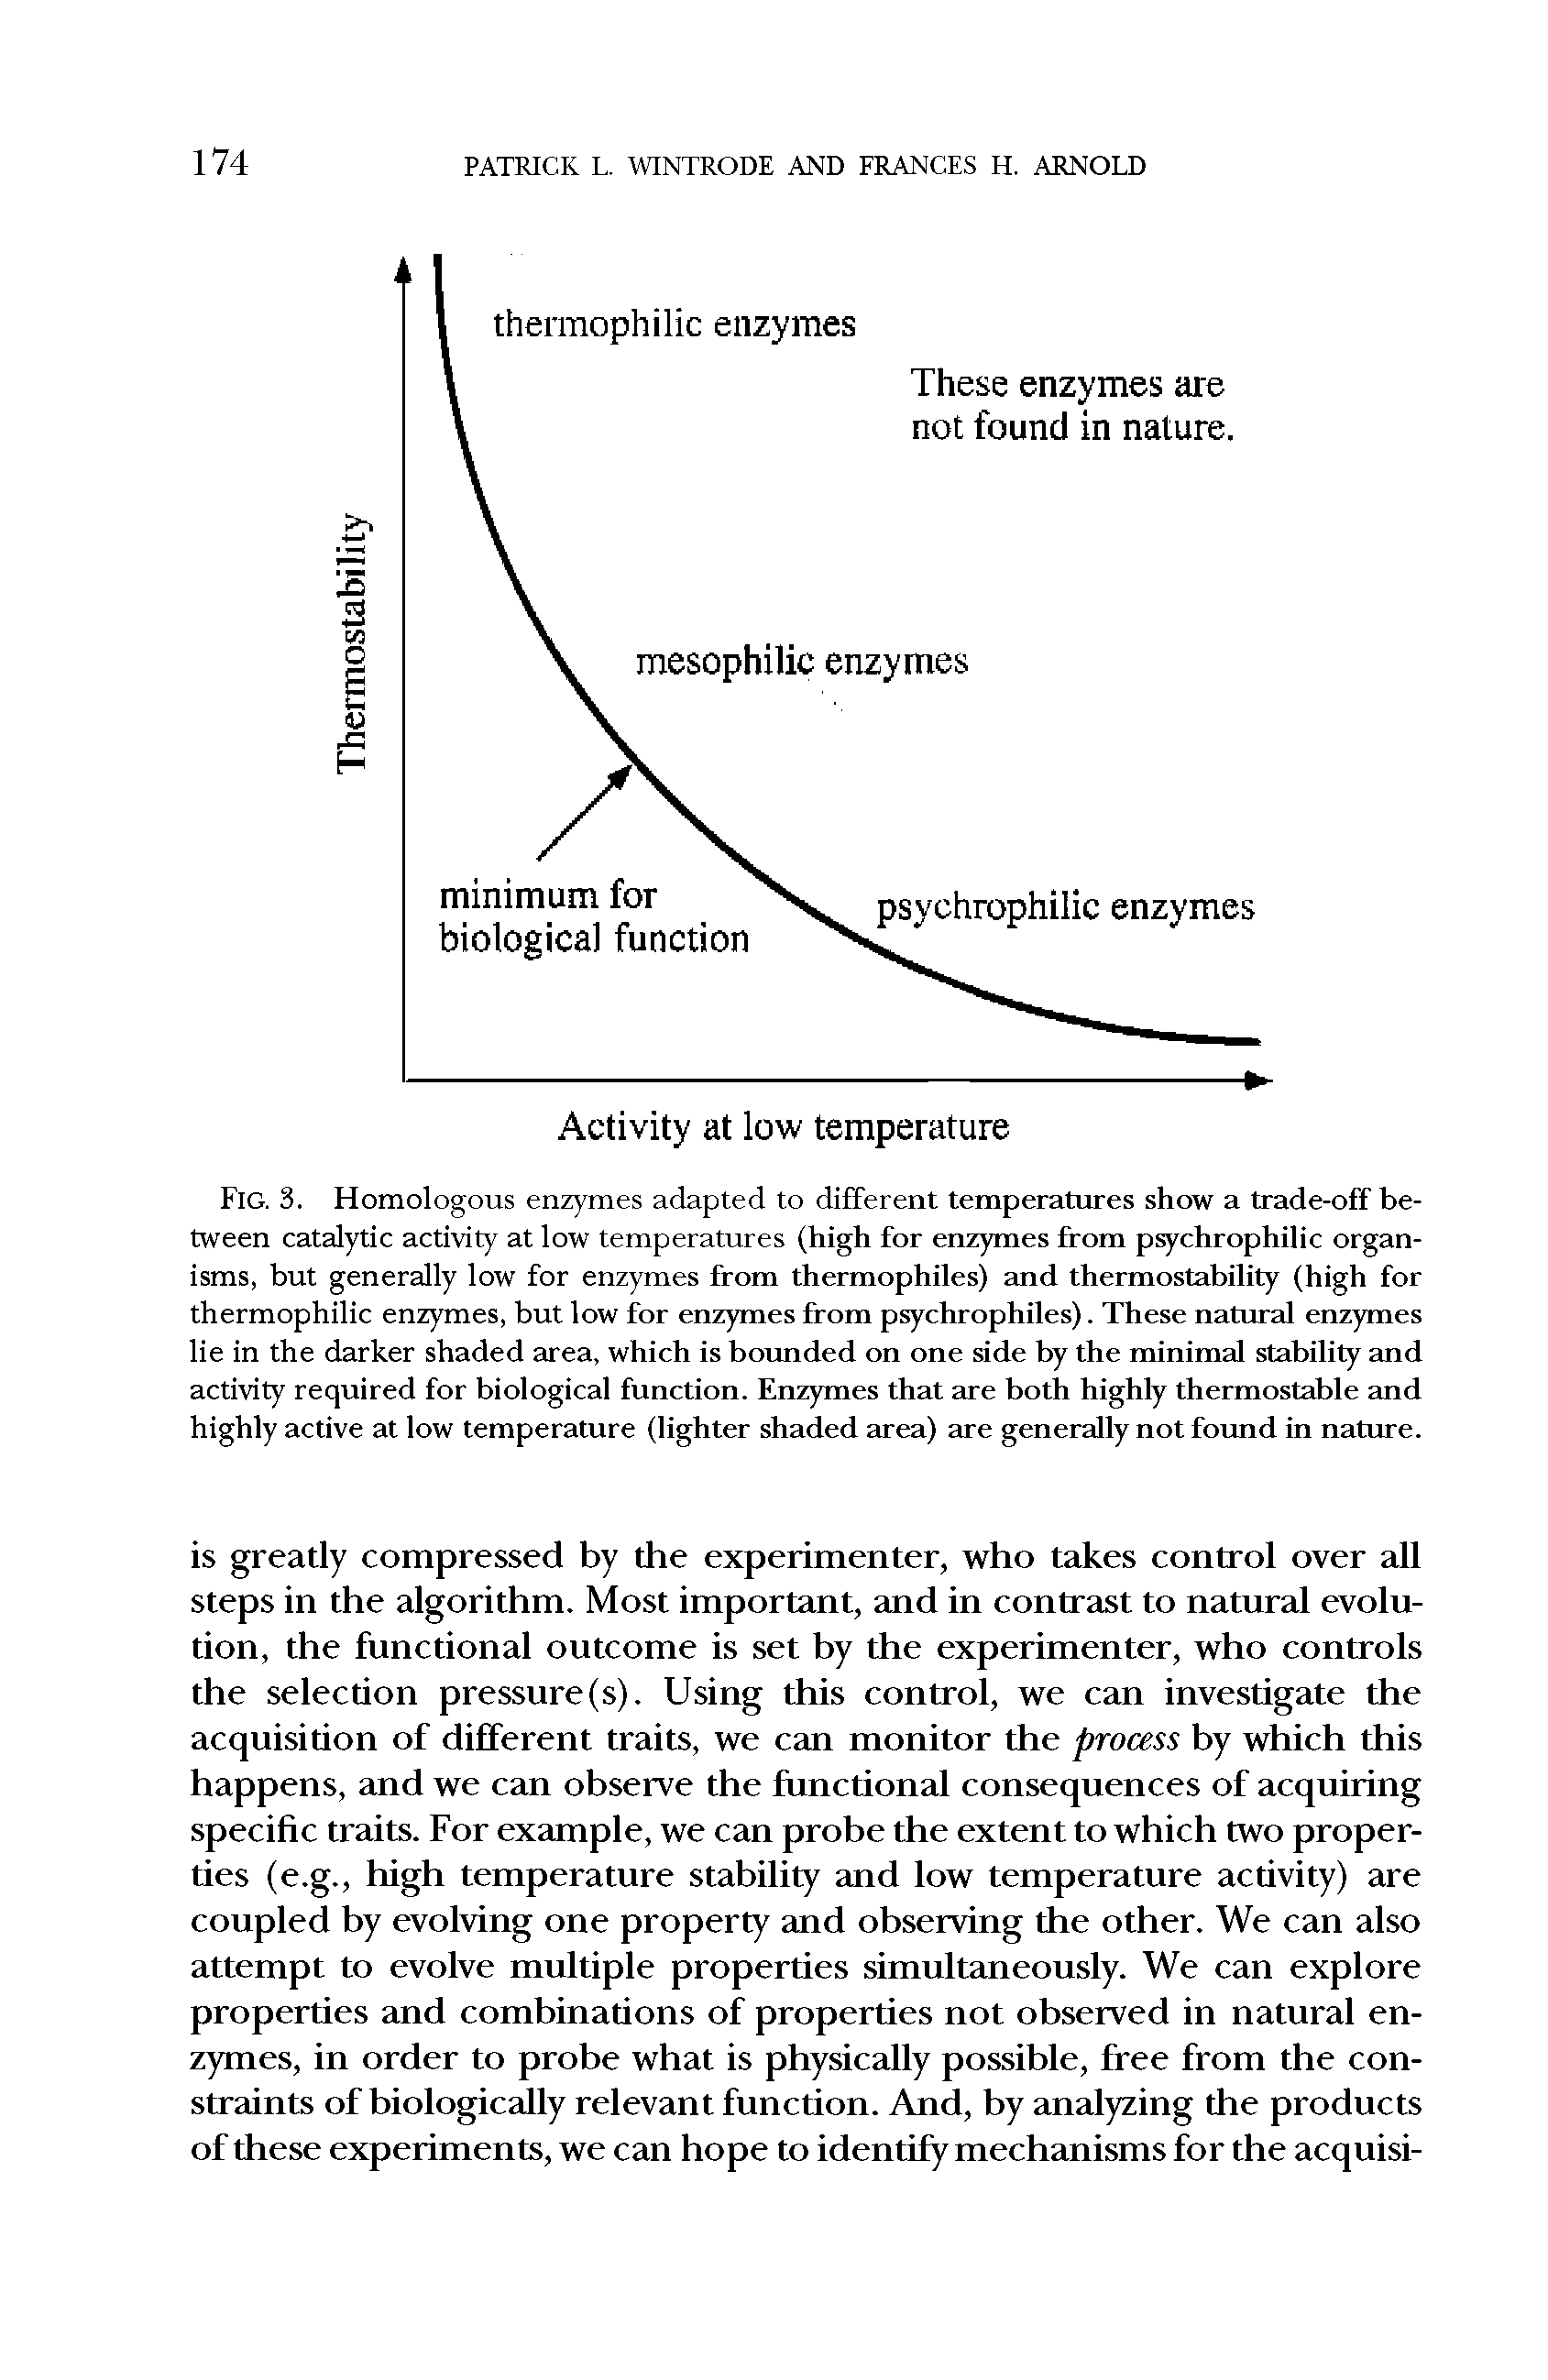 Fig. 3. Homologous enzymes adapted to different temperatures show a trade-off between catalytic activity at low temperatures (high for enzymes from psychrophilic organisms, but generally low for enzymes from thermophiles) and thermostability (high for thermophilic enzymes, but low for enzymes from psychrophiles). These natural enzymes lie in the darker shaded area, which is bounded on one side by the minimal stability and activity required for biological function. Enzymes that are both highly thermostable and highly active at low temperature (lighter shaded area) are generally not found in nature.